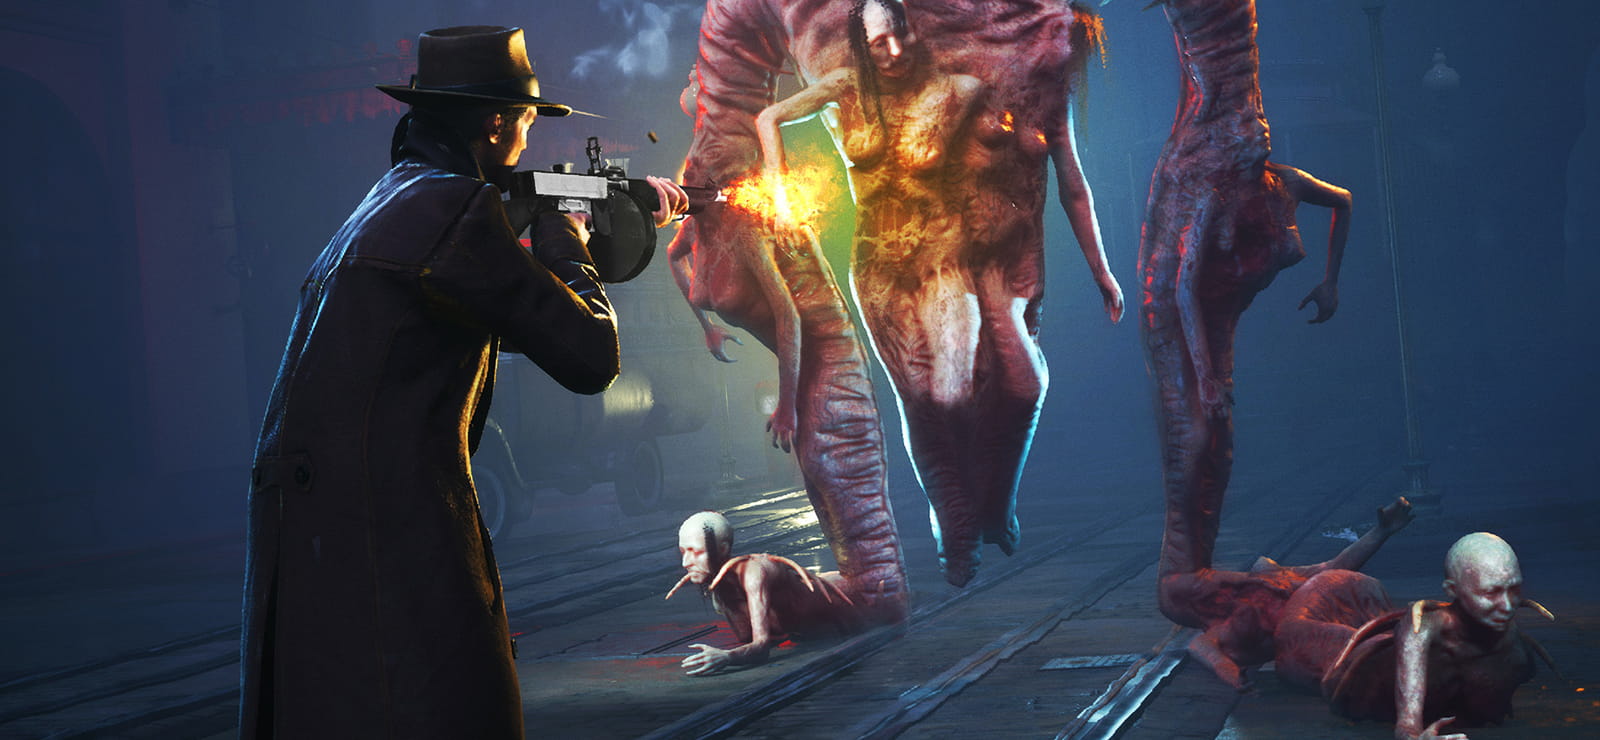 The Sinking City - Worshippers Of The Necronomicon